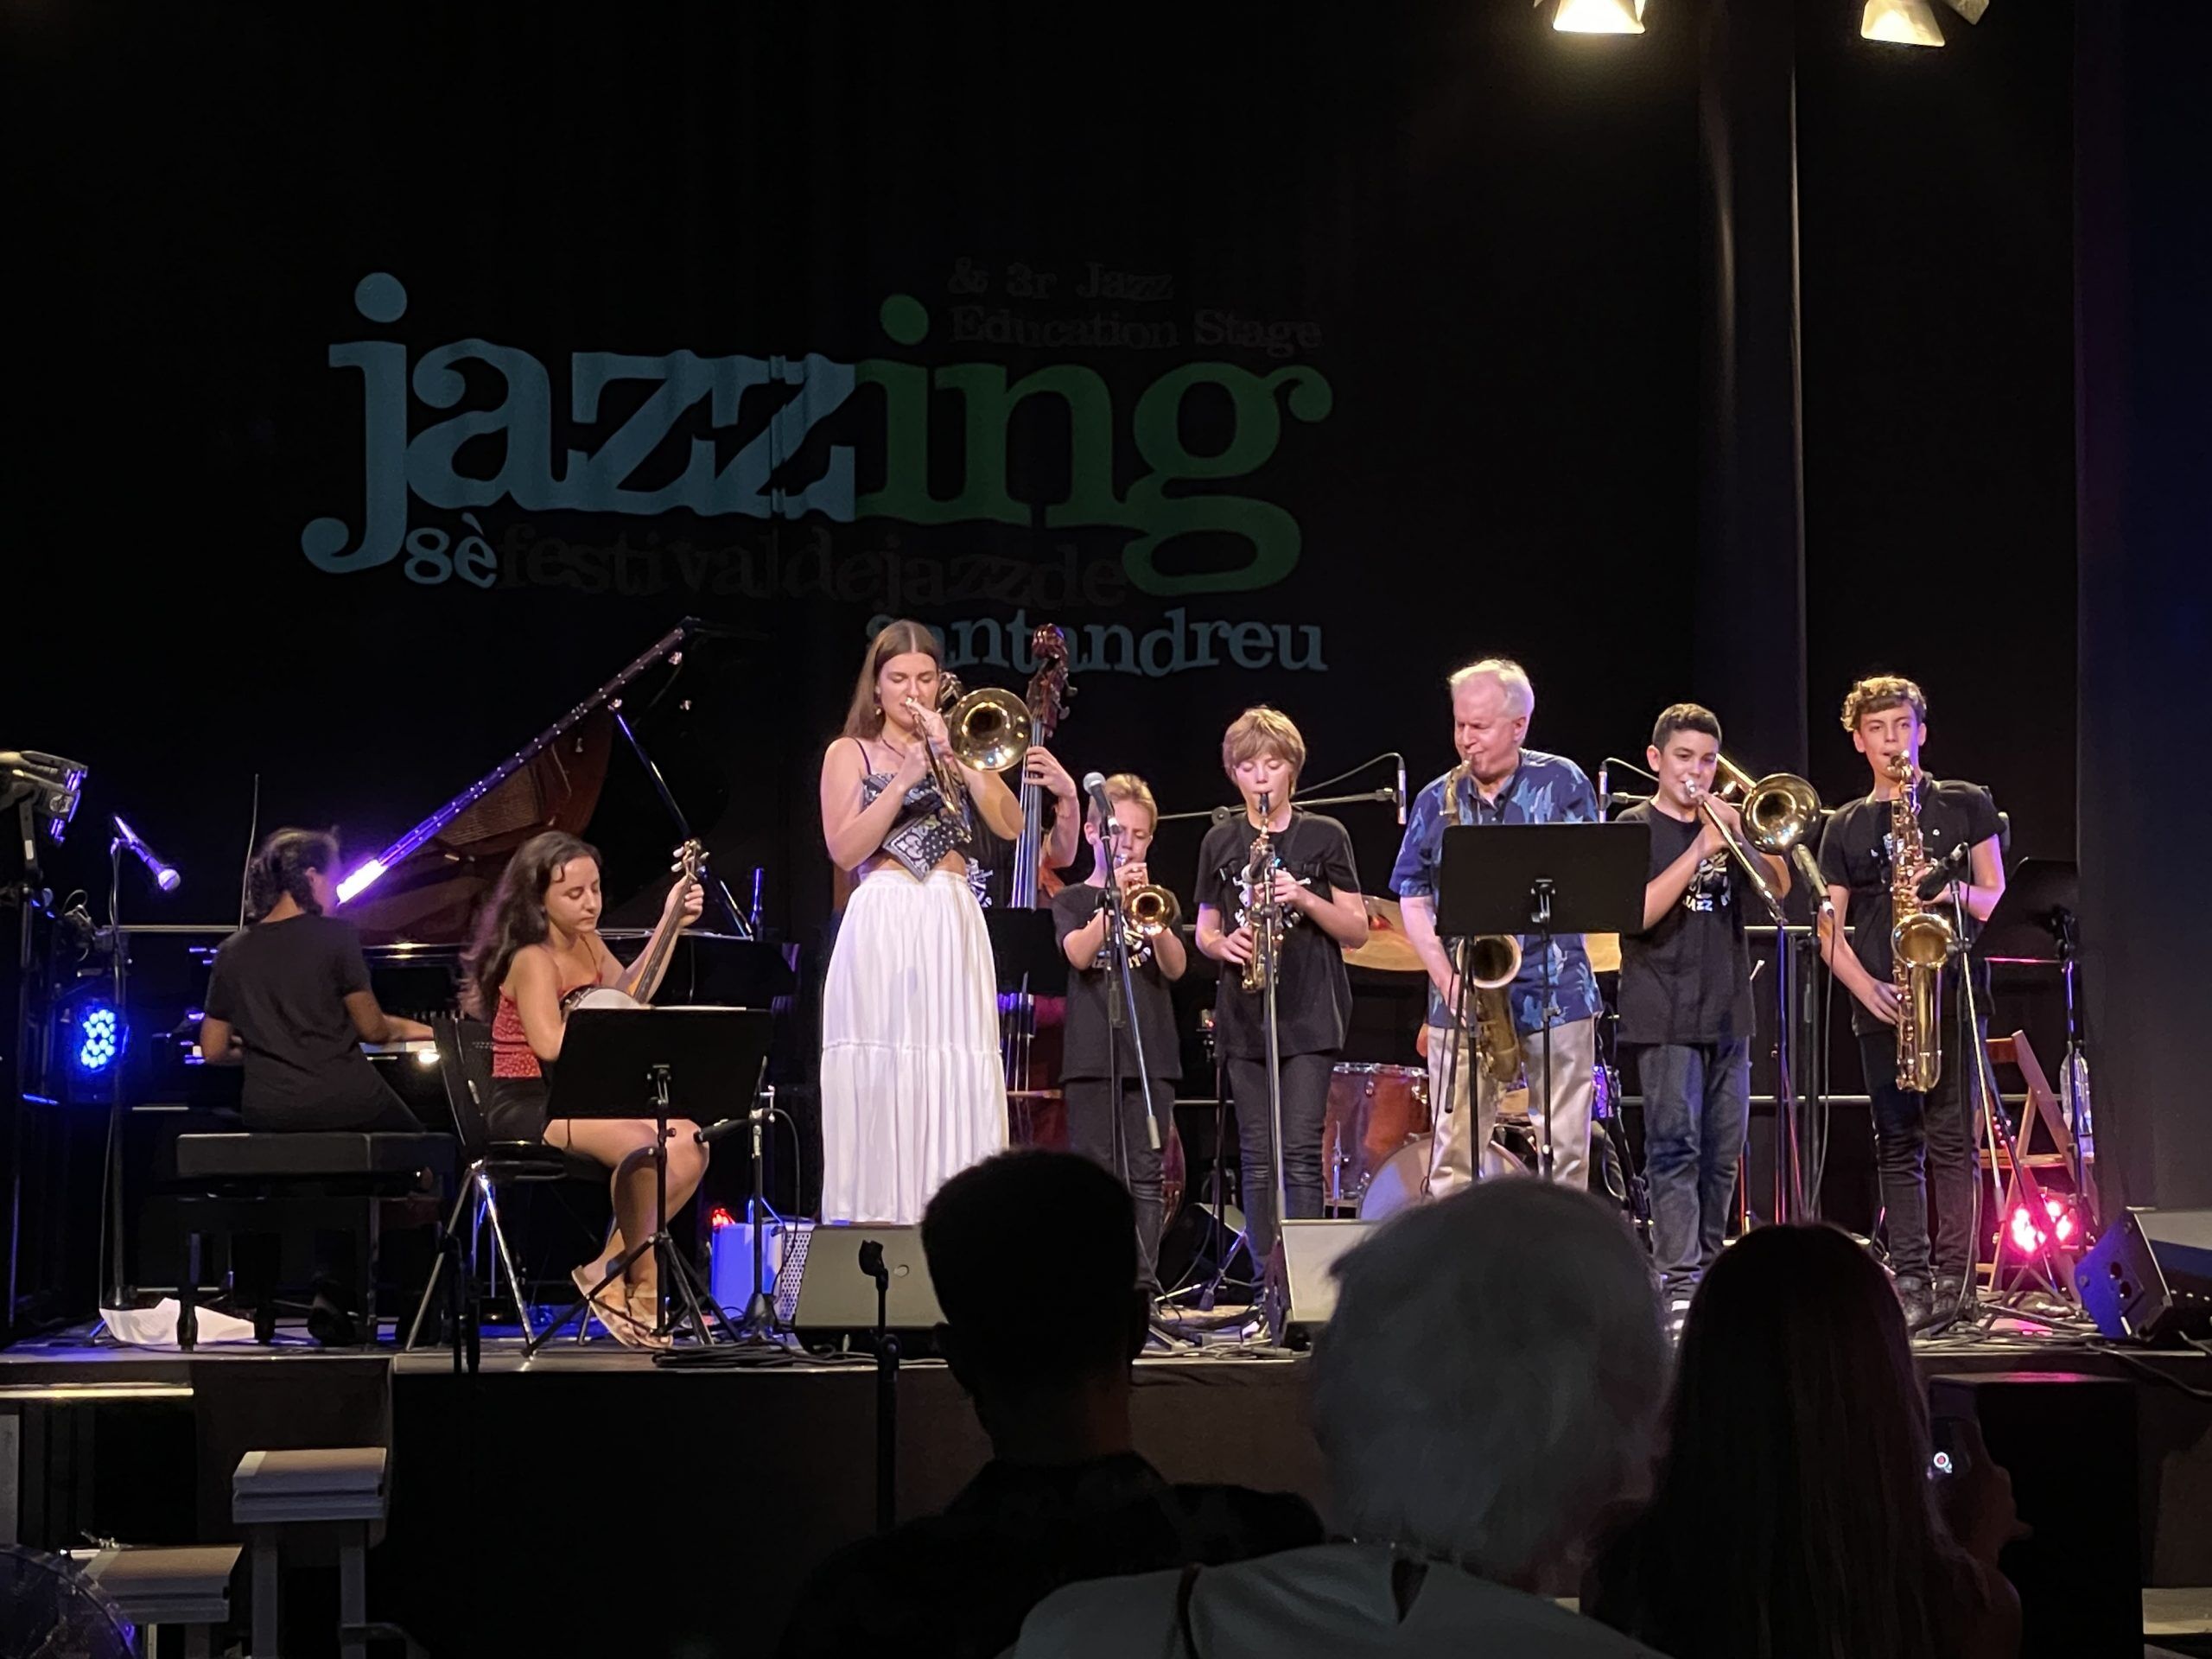 The Sant Andreu Jazz Band: Our Newest Jazz Stars Are From—Barcelona?